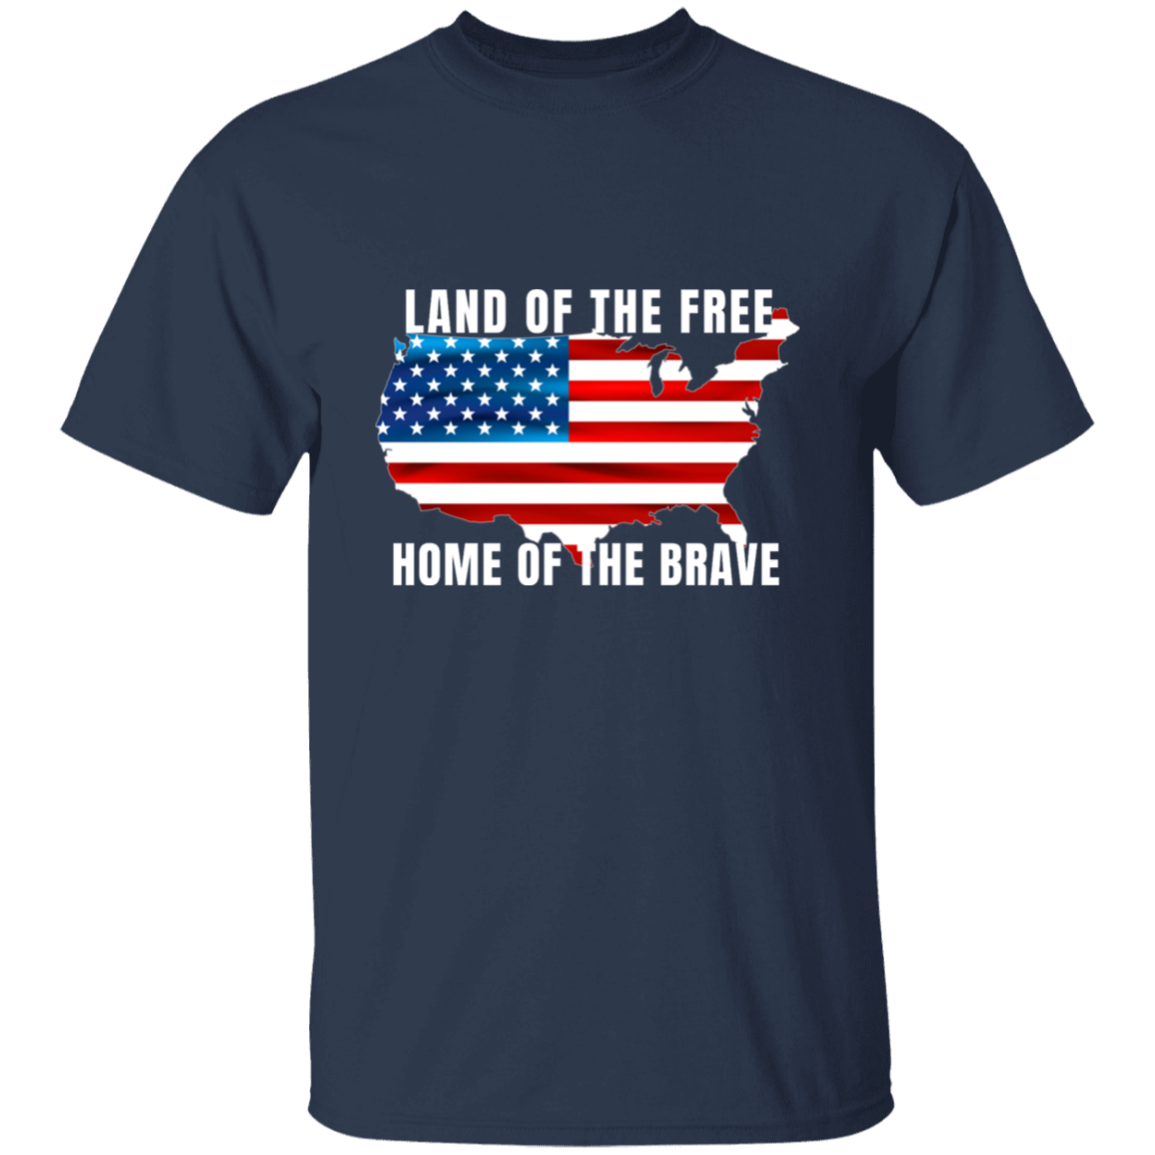 Land of the free | T-Shirt